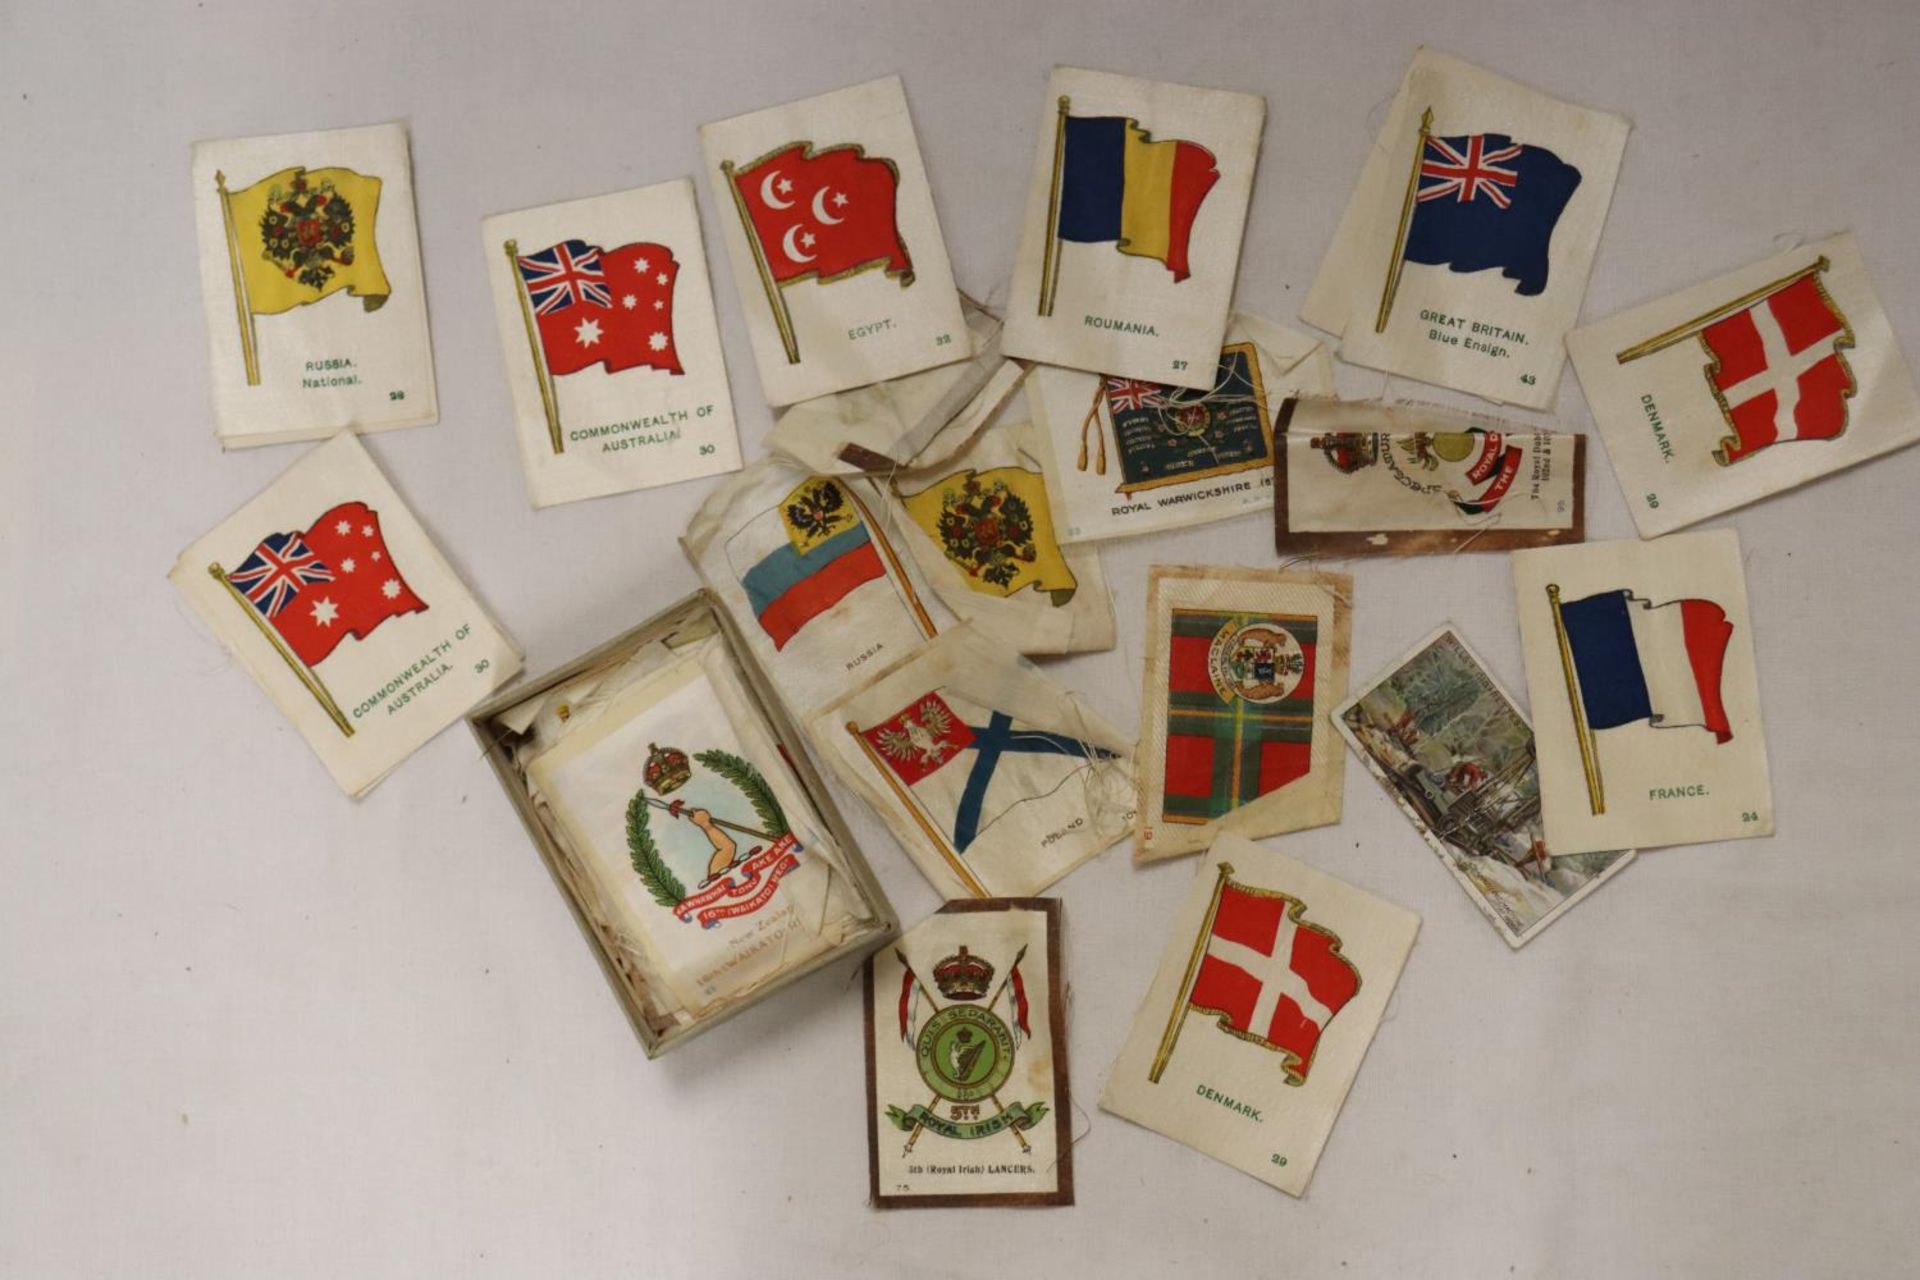 A BOX OF MURATTI CIGARETTES SILK CARDS CIRCA 1914, THE SILKS BEING FLAGS OF THE WORLD - Image 2 of 5